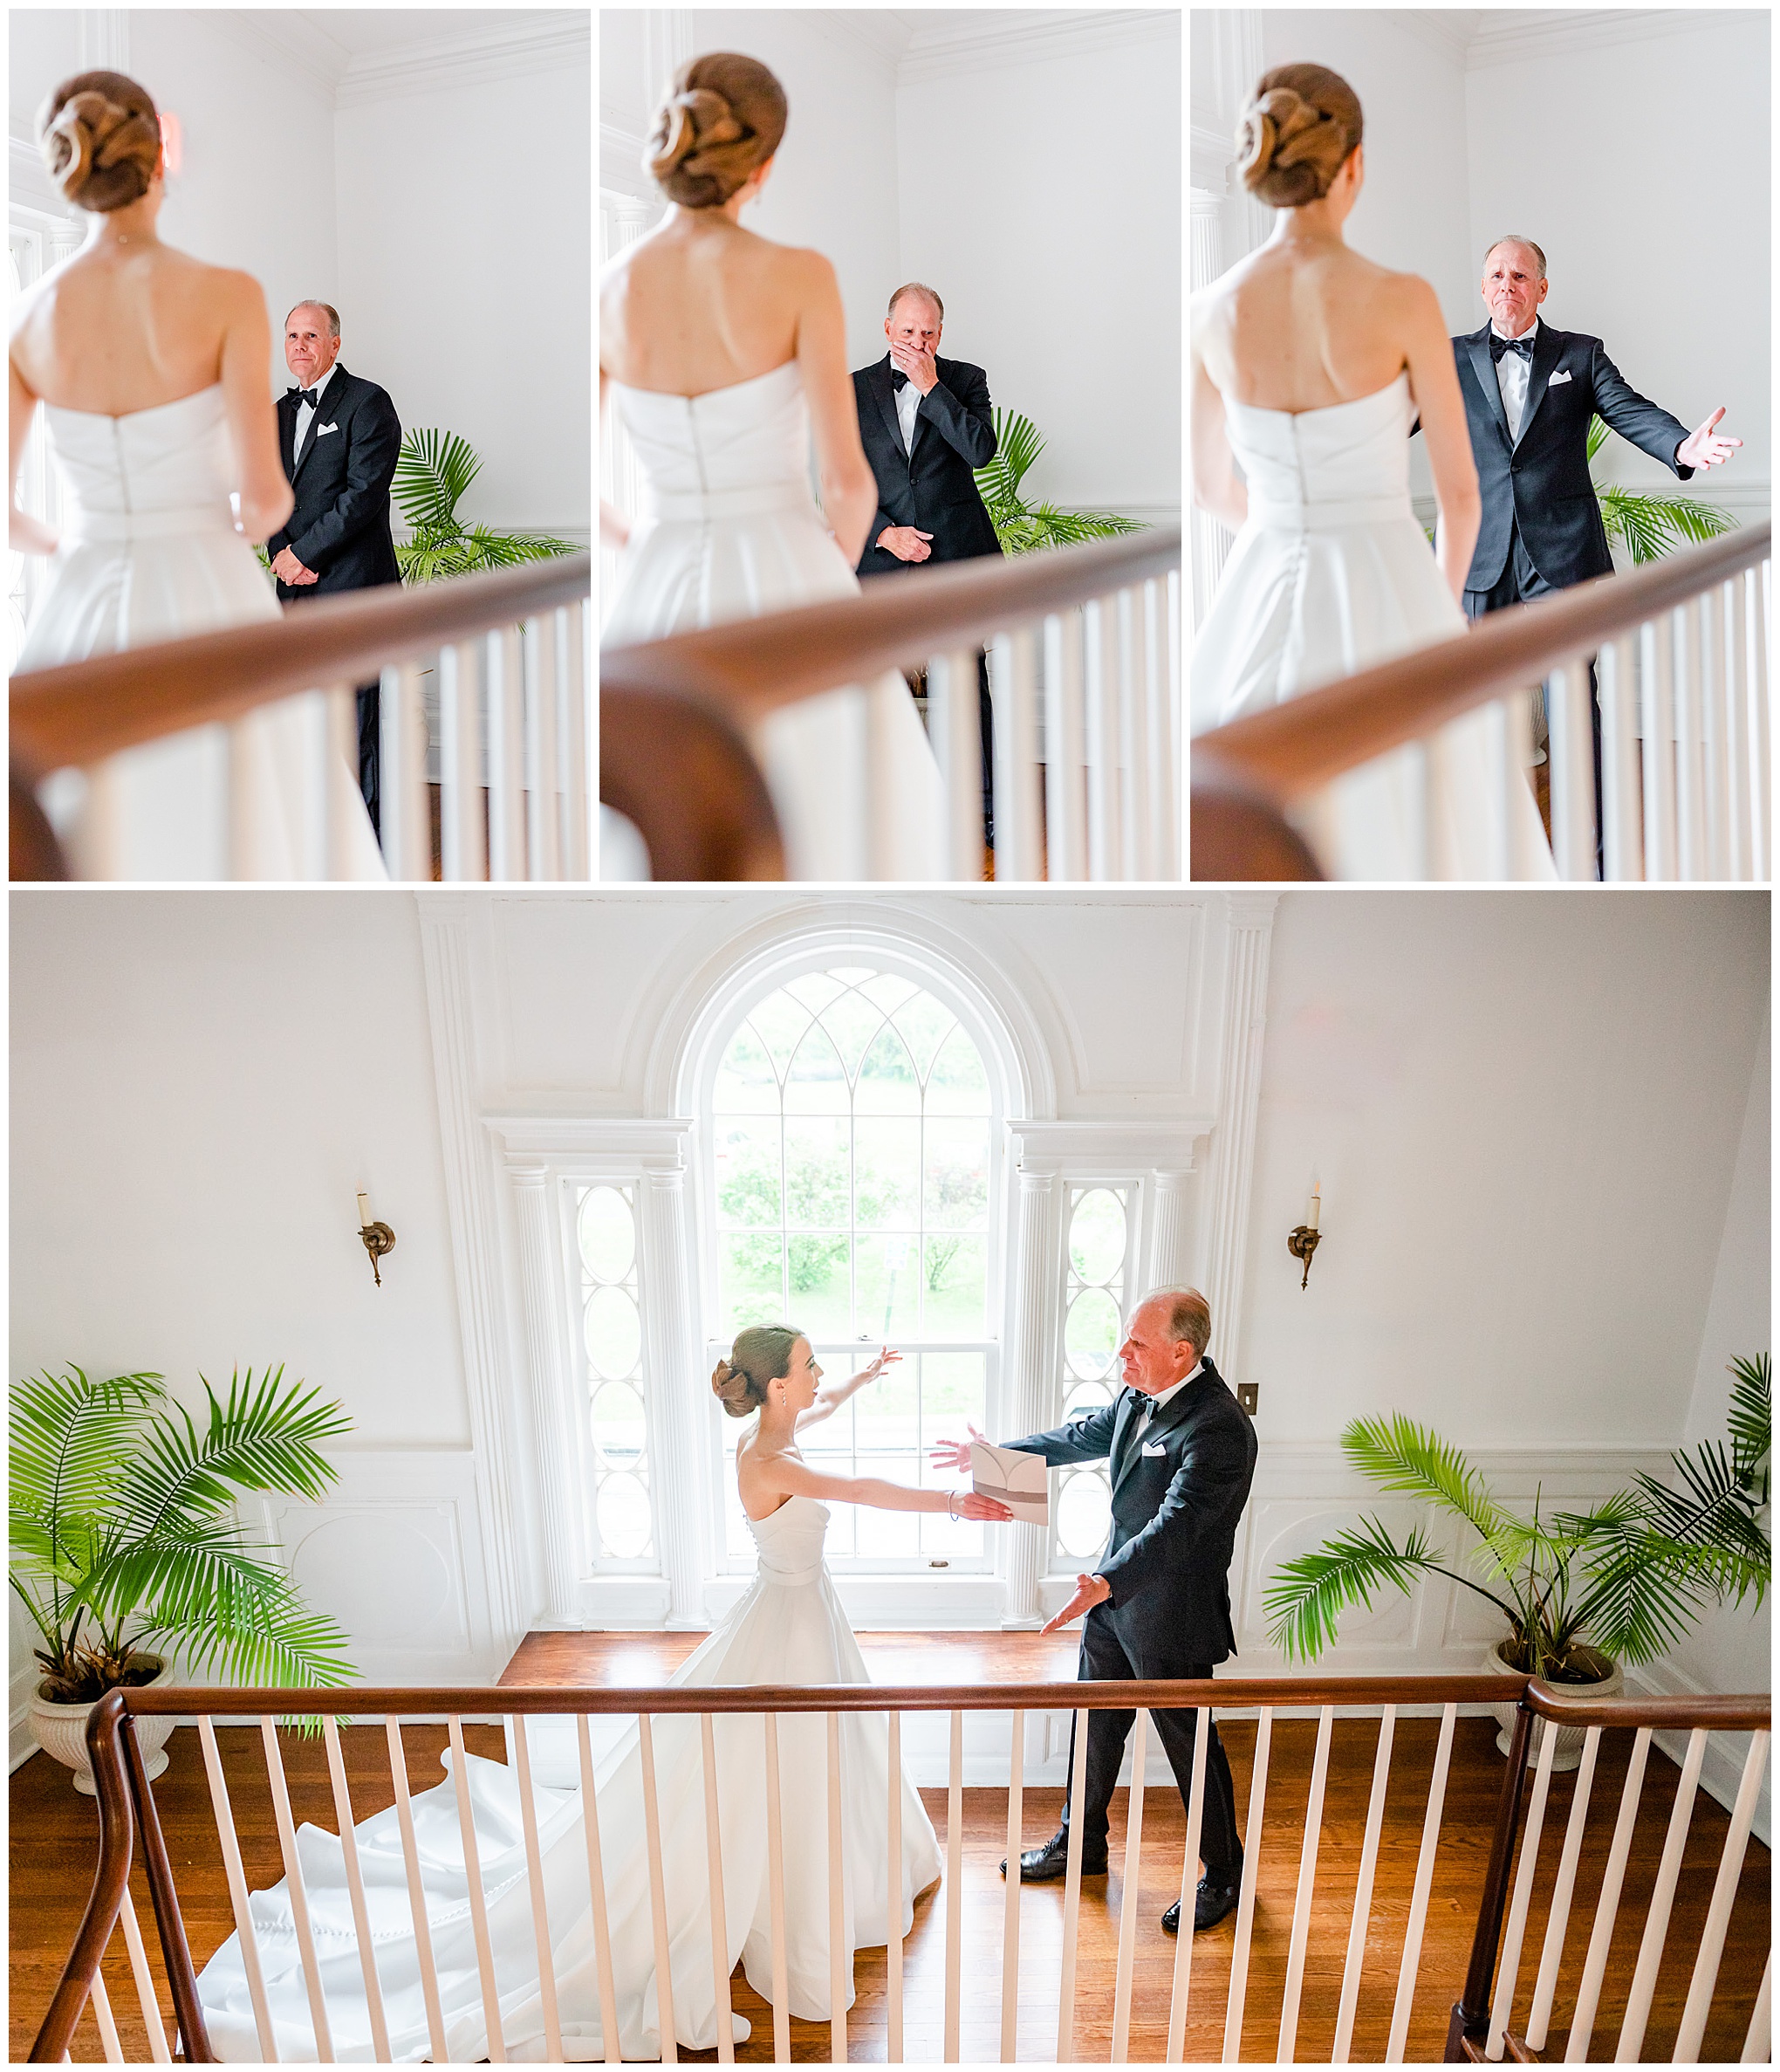 classic Rust Manor House wedding, sprig wedding, black and white aesthetic, classic wedding aesthetic, White Pumpkin Weddings City Tavern Club wedding, Leesburg wedding, Leesbur bride, manor house wedding, classic DC wedding, northern Virginia wedding venue, classic wedding venue, Washington DC wedding photographer, Rachel E.H. Photography, bride doing first look with father, bride coming down stairs, bride hugging father